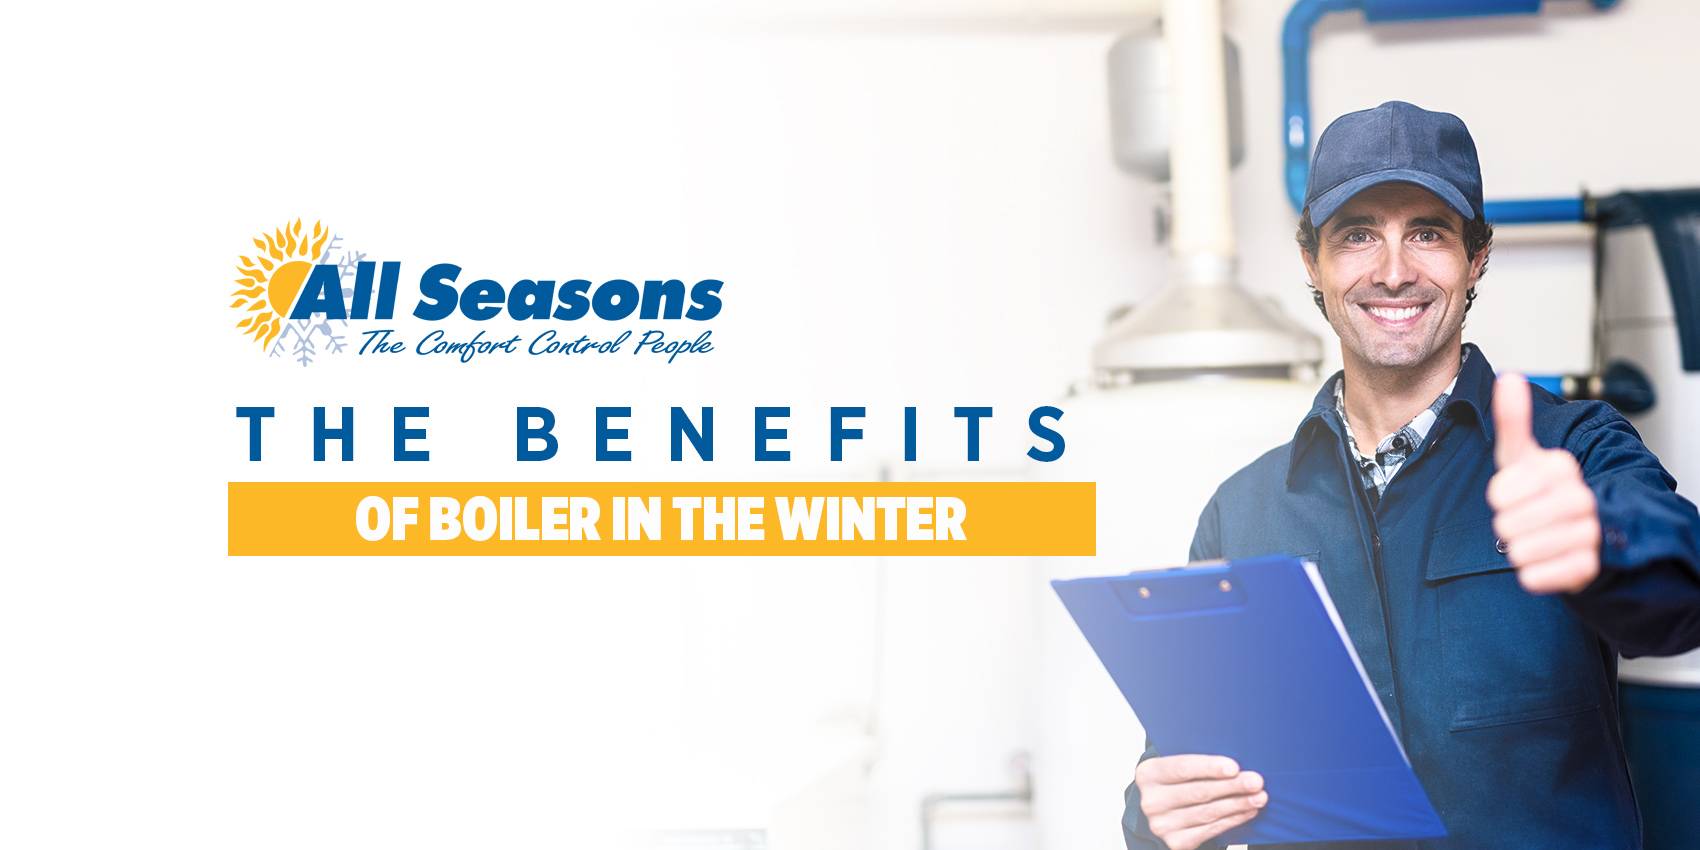 The Benefits of Boiler in the Winter